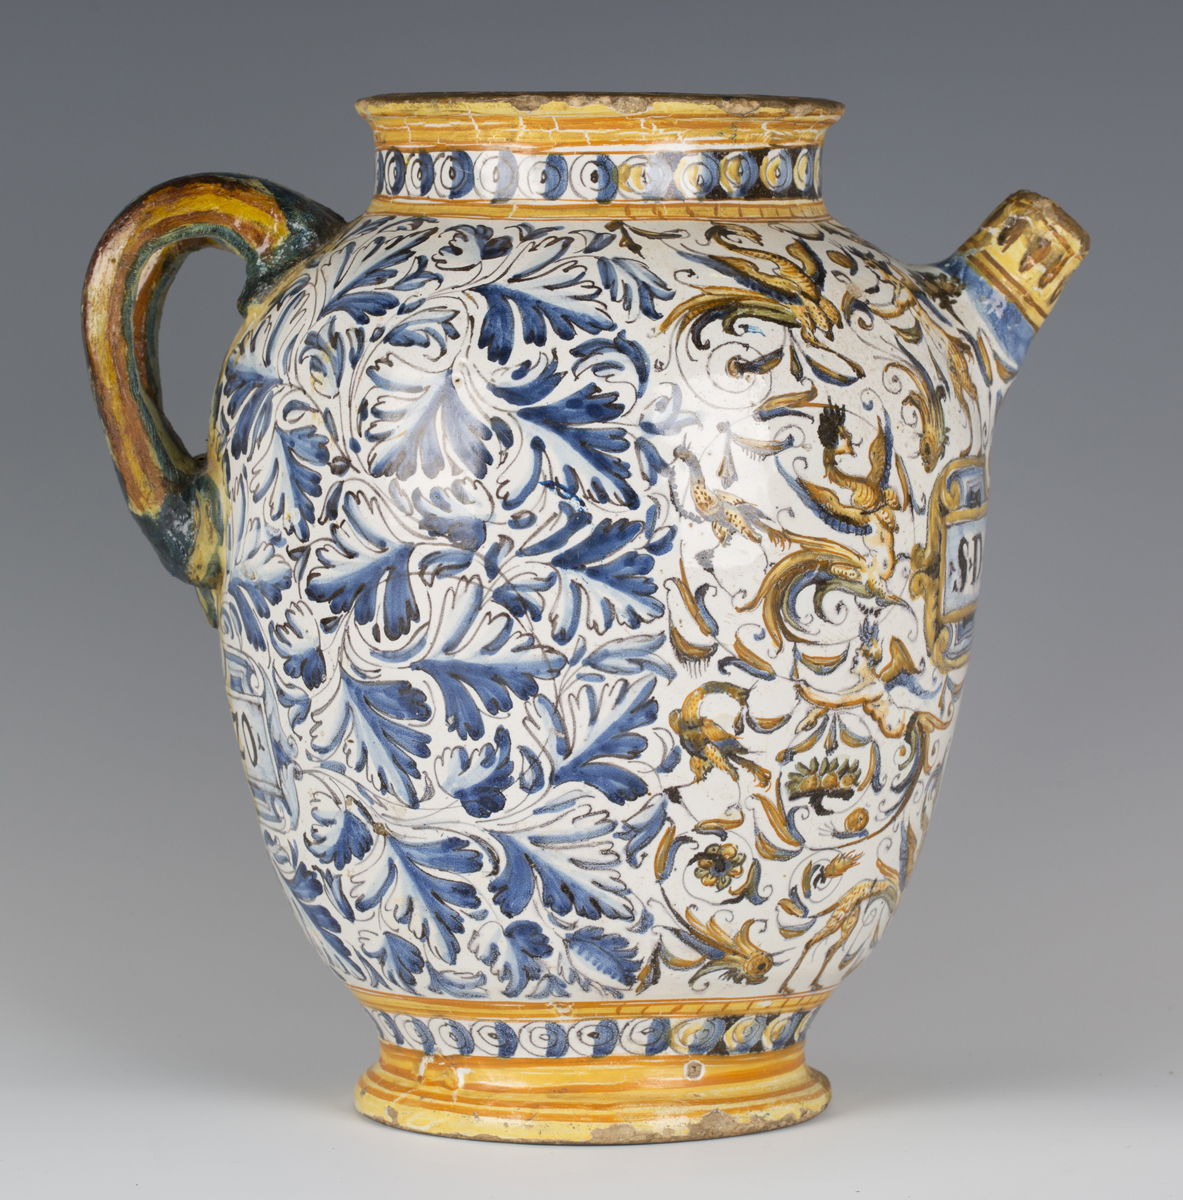 An Italian maiolica wet drug jar, probably Deruta, 17th century, the ovoid body painted to the front